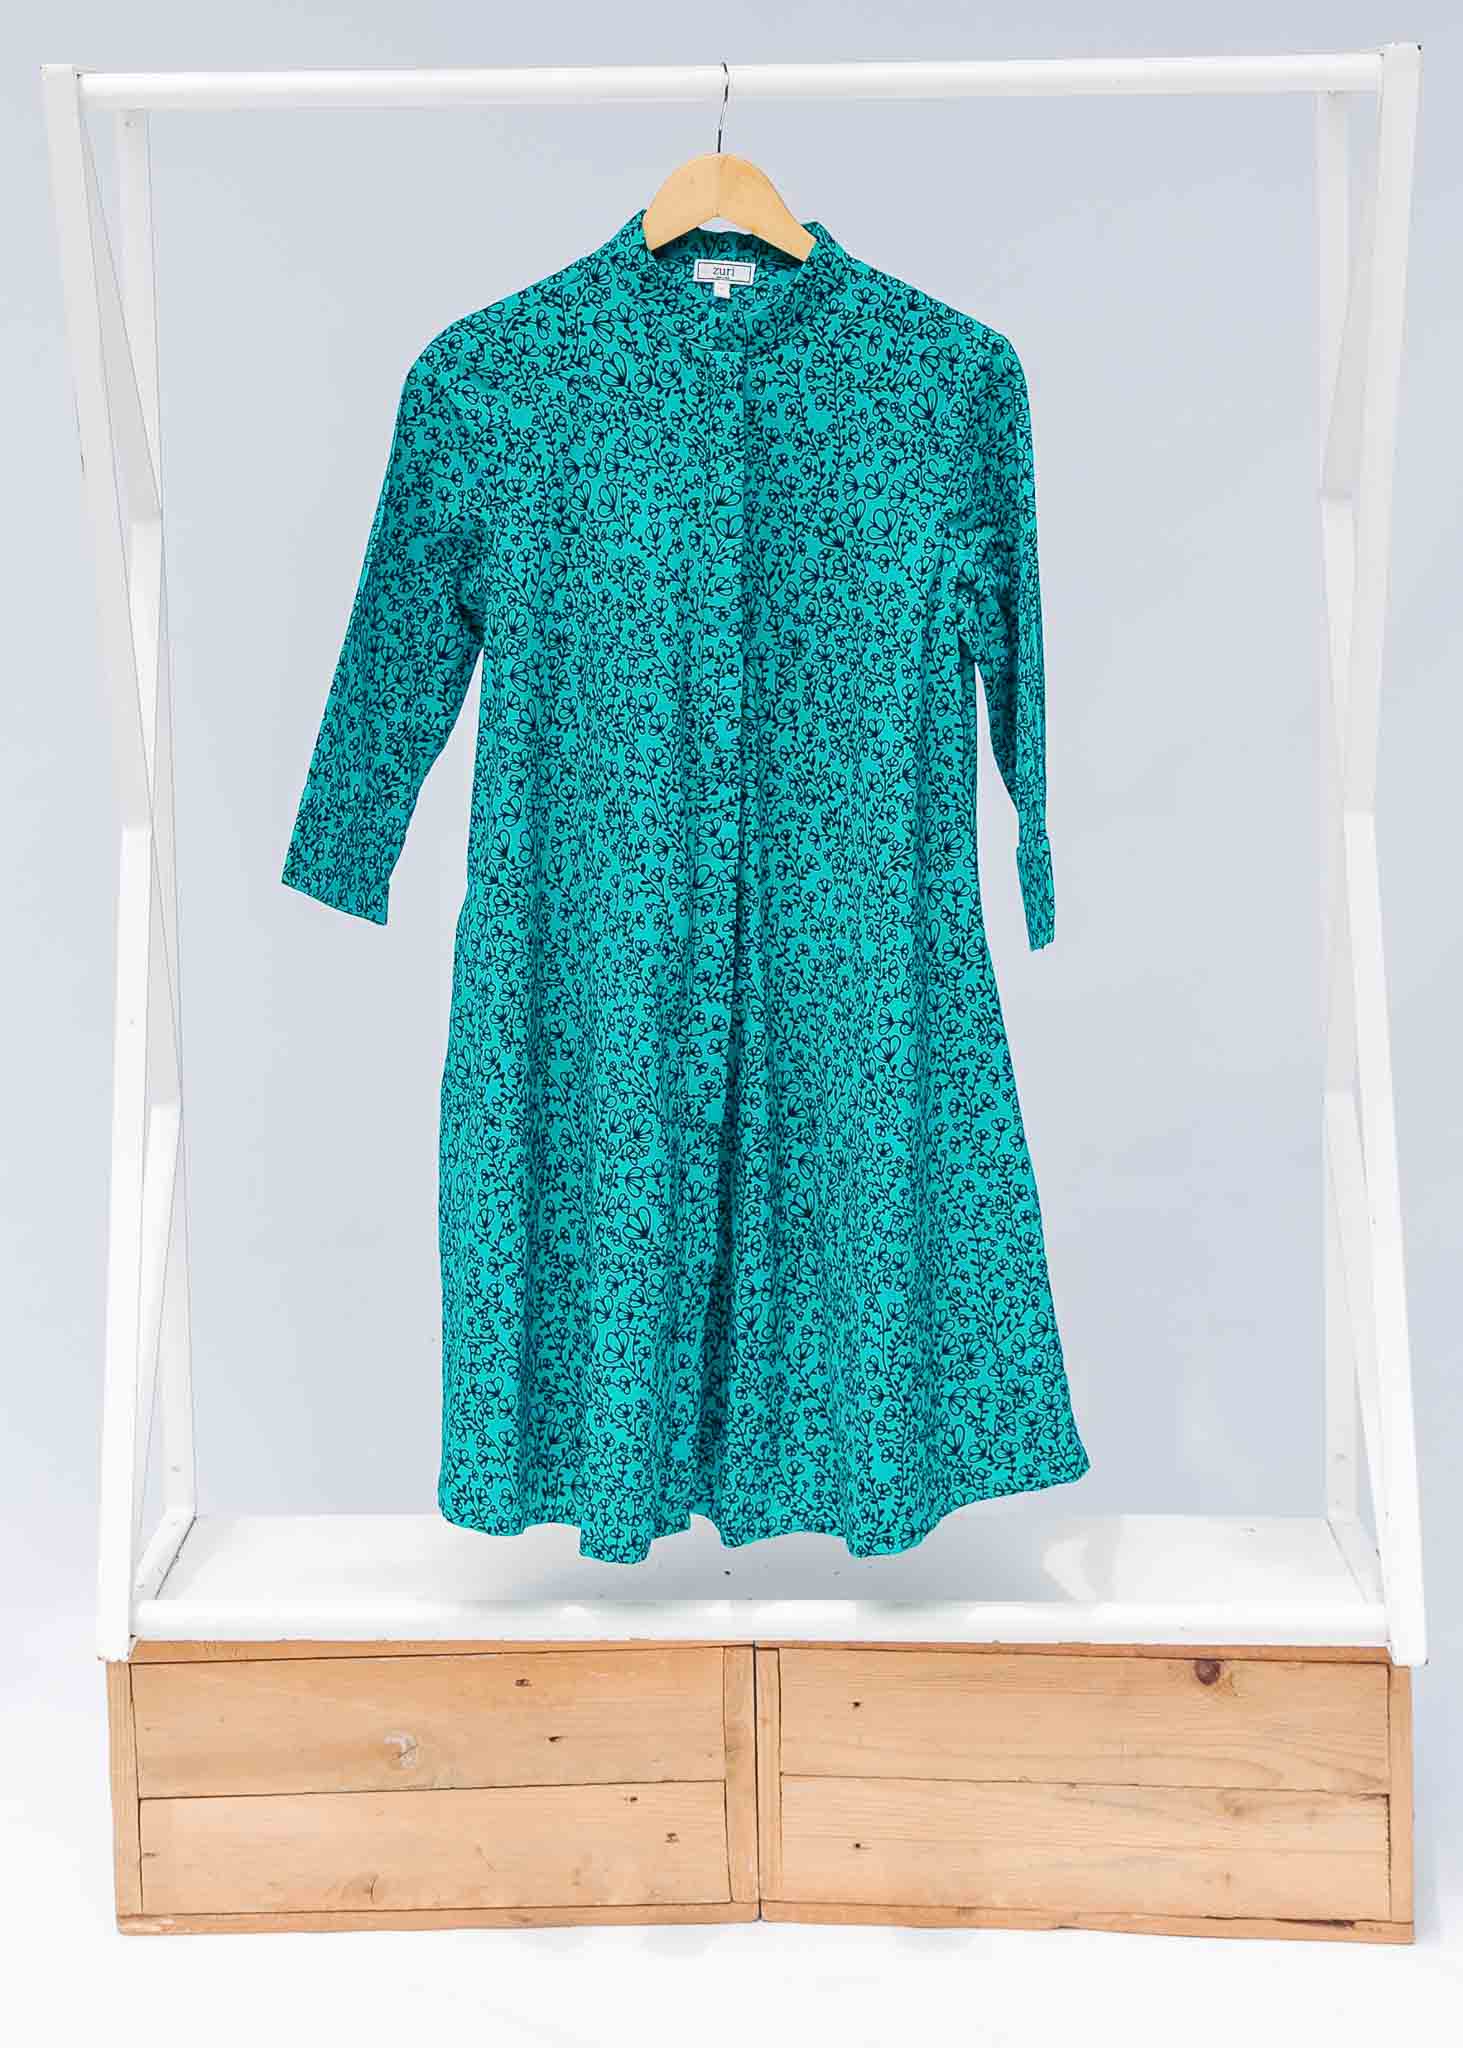 Display of turquoise dress with small black vine print.